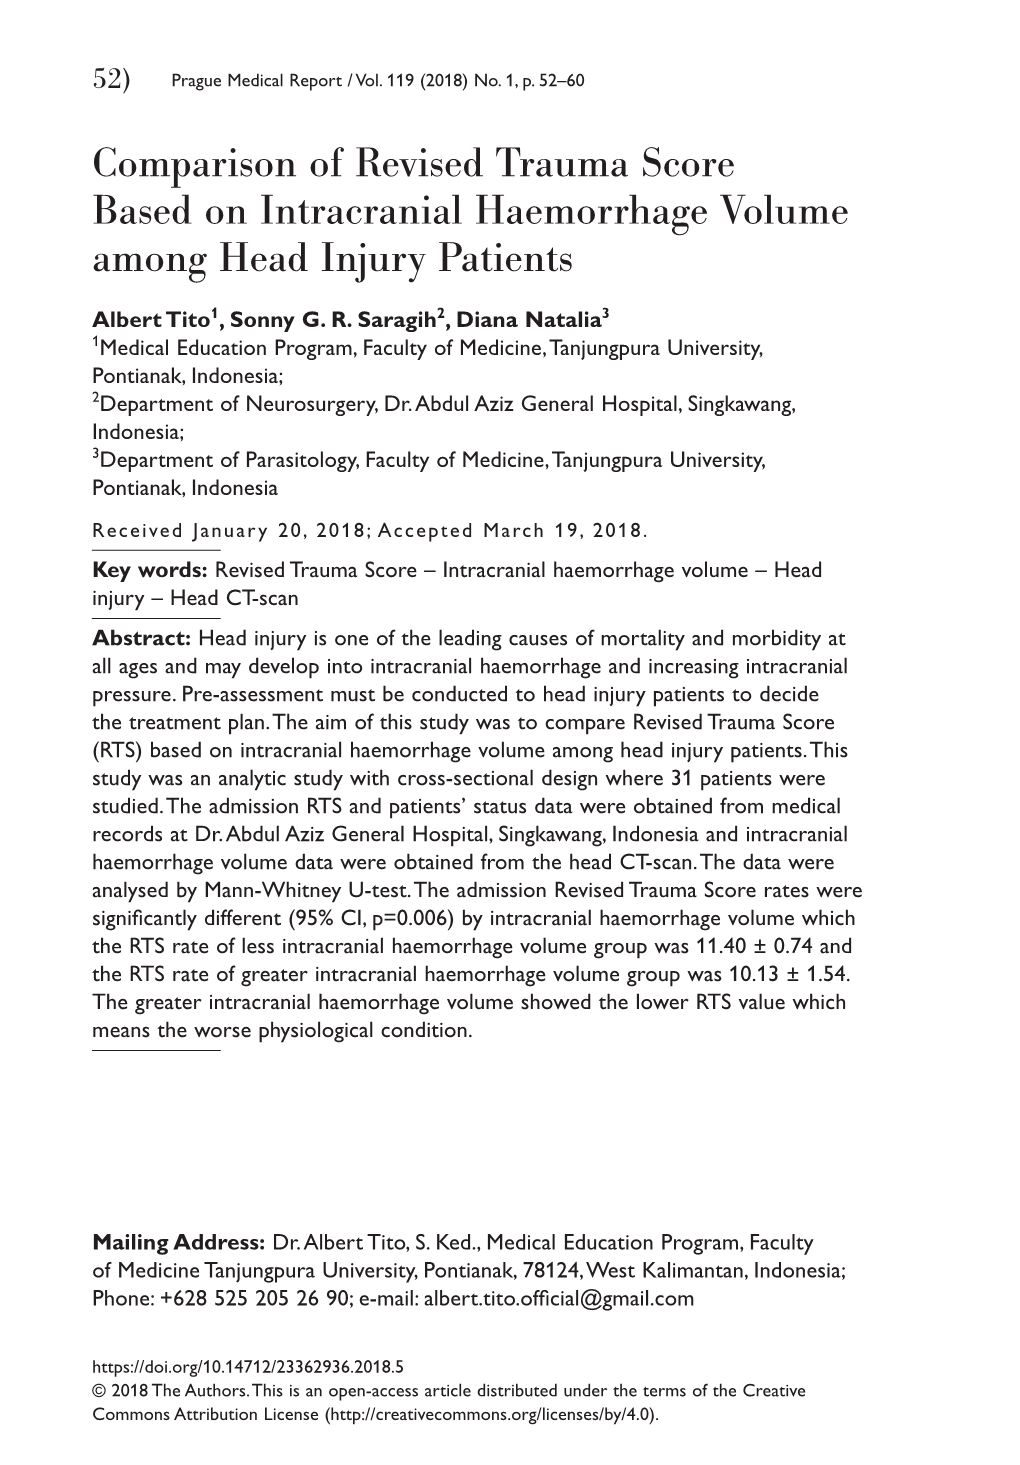 Comparison of Revised Trauma Score Based on Intracranial Haemorrhage Volume Among Head Injury Patients